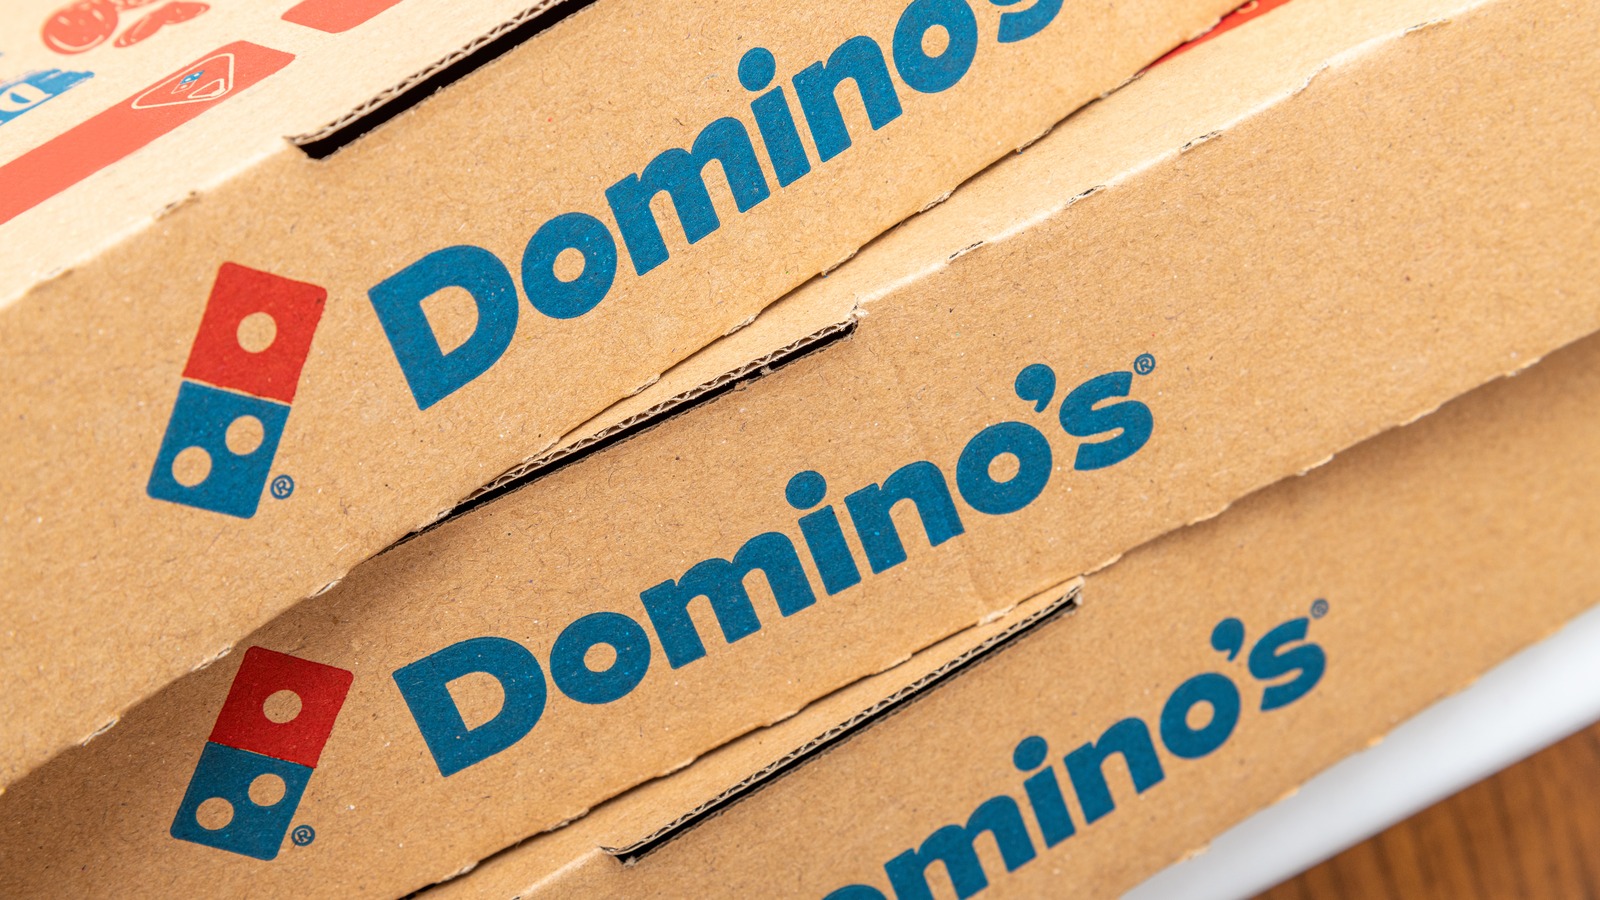 Domino's Is Rebranding As A Potato Shop, At Least On Twitter